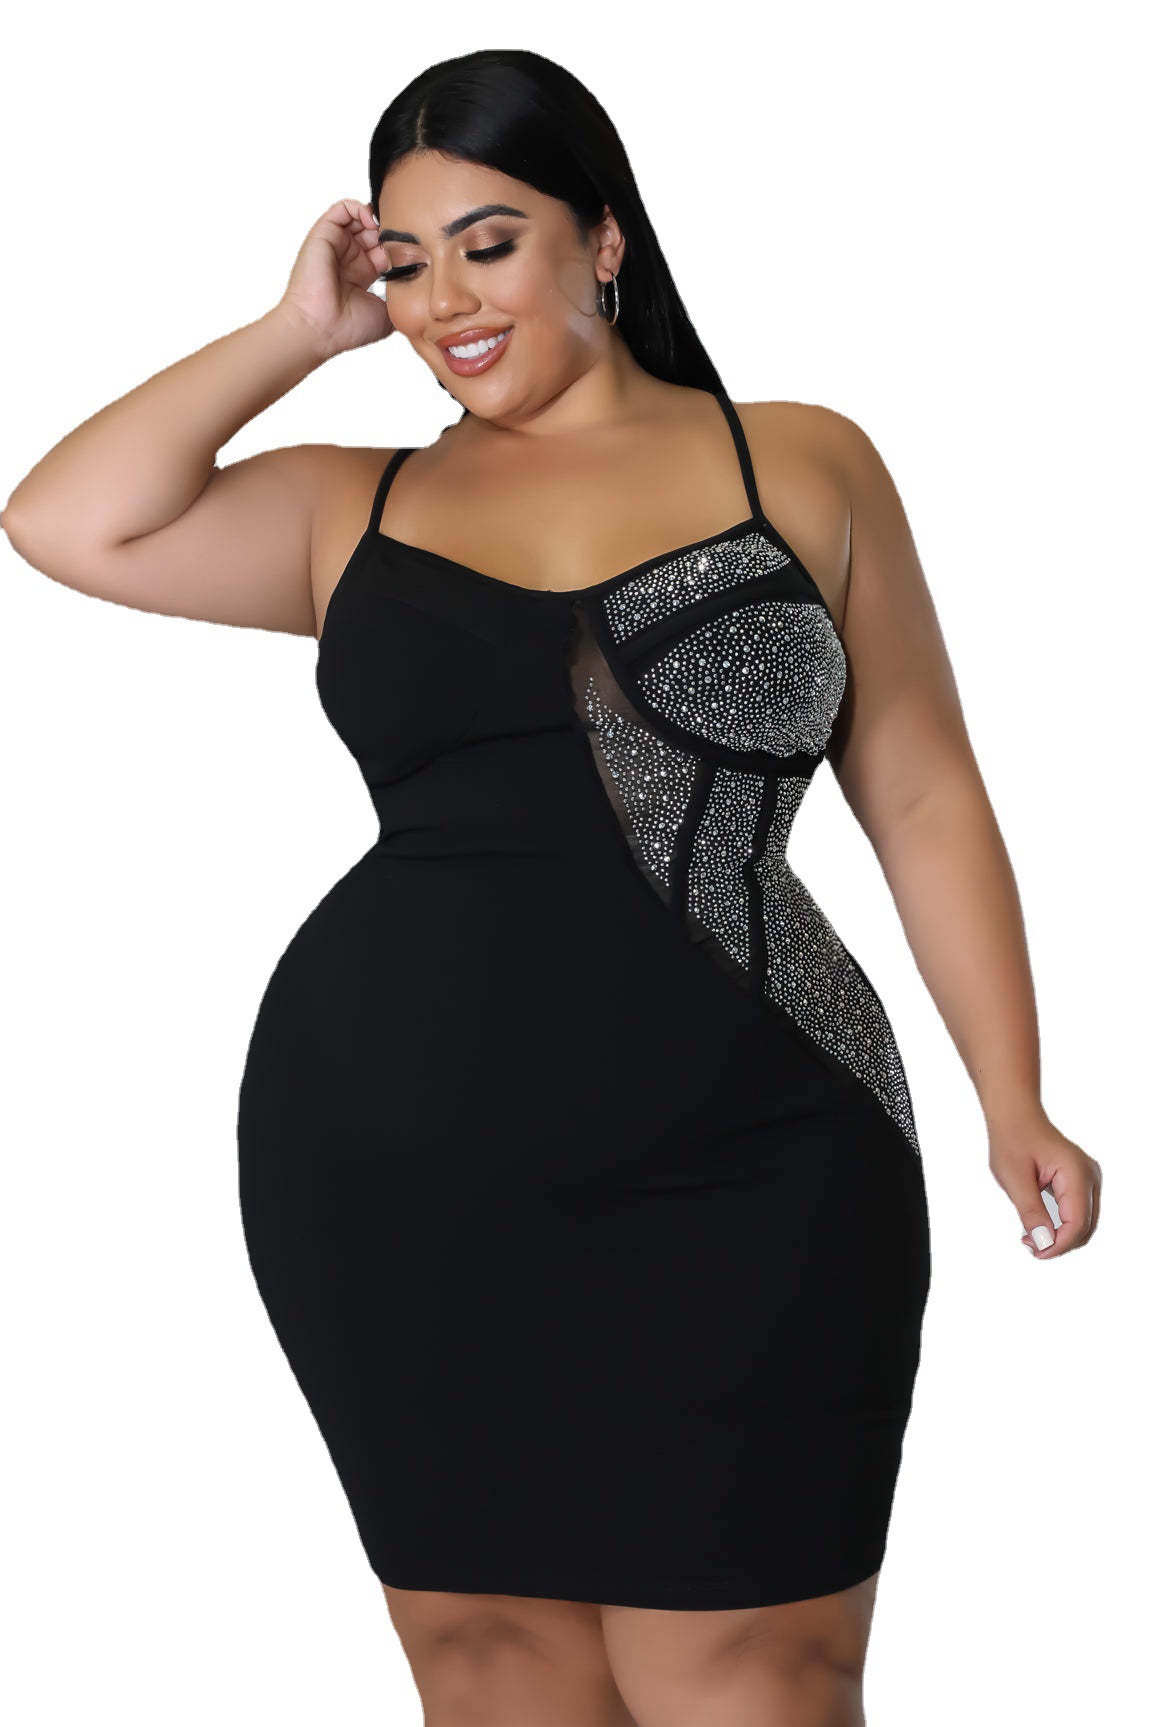 Plus Size Short Sleeveless Hand-beaded Trapeze Dress Candied